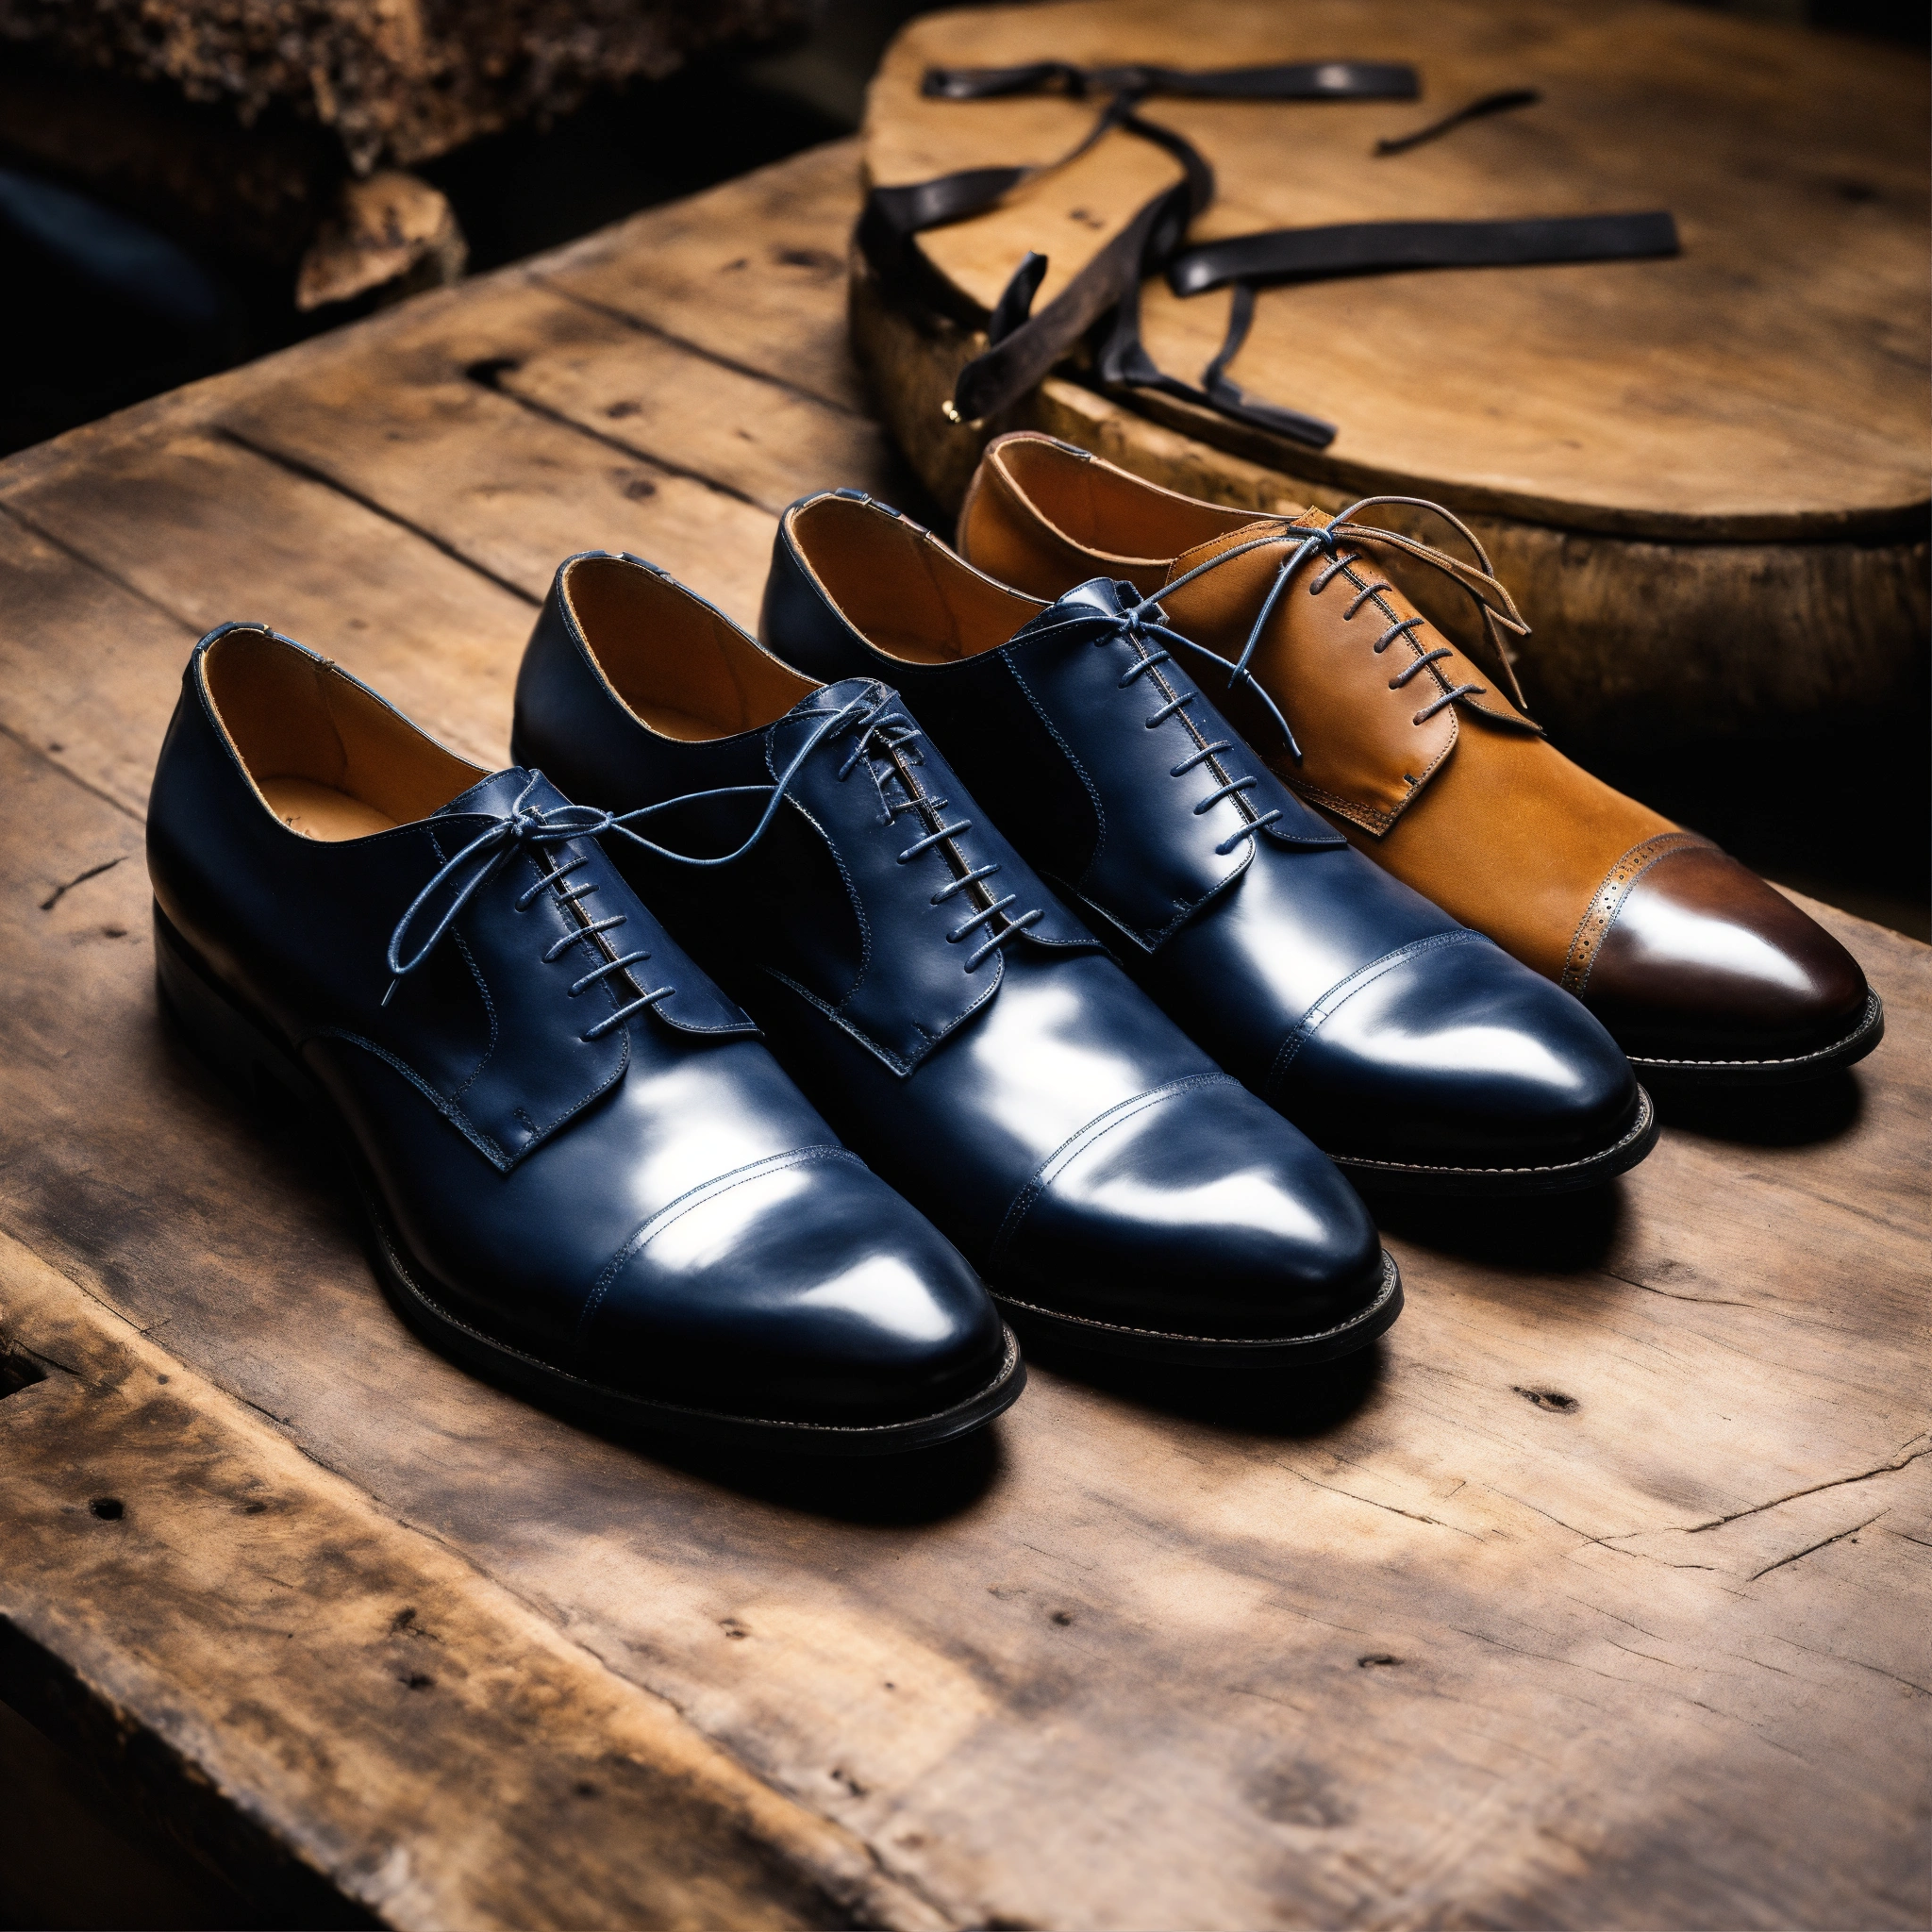 Lexica - 3 mens formal shoes sitting upside down on rustic table. 1st ...